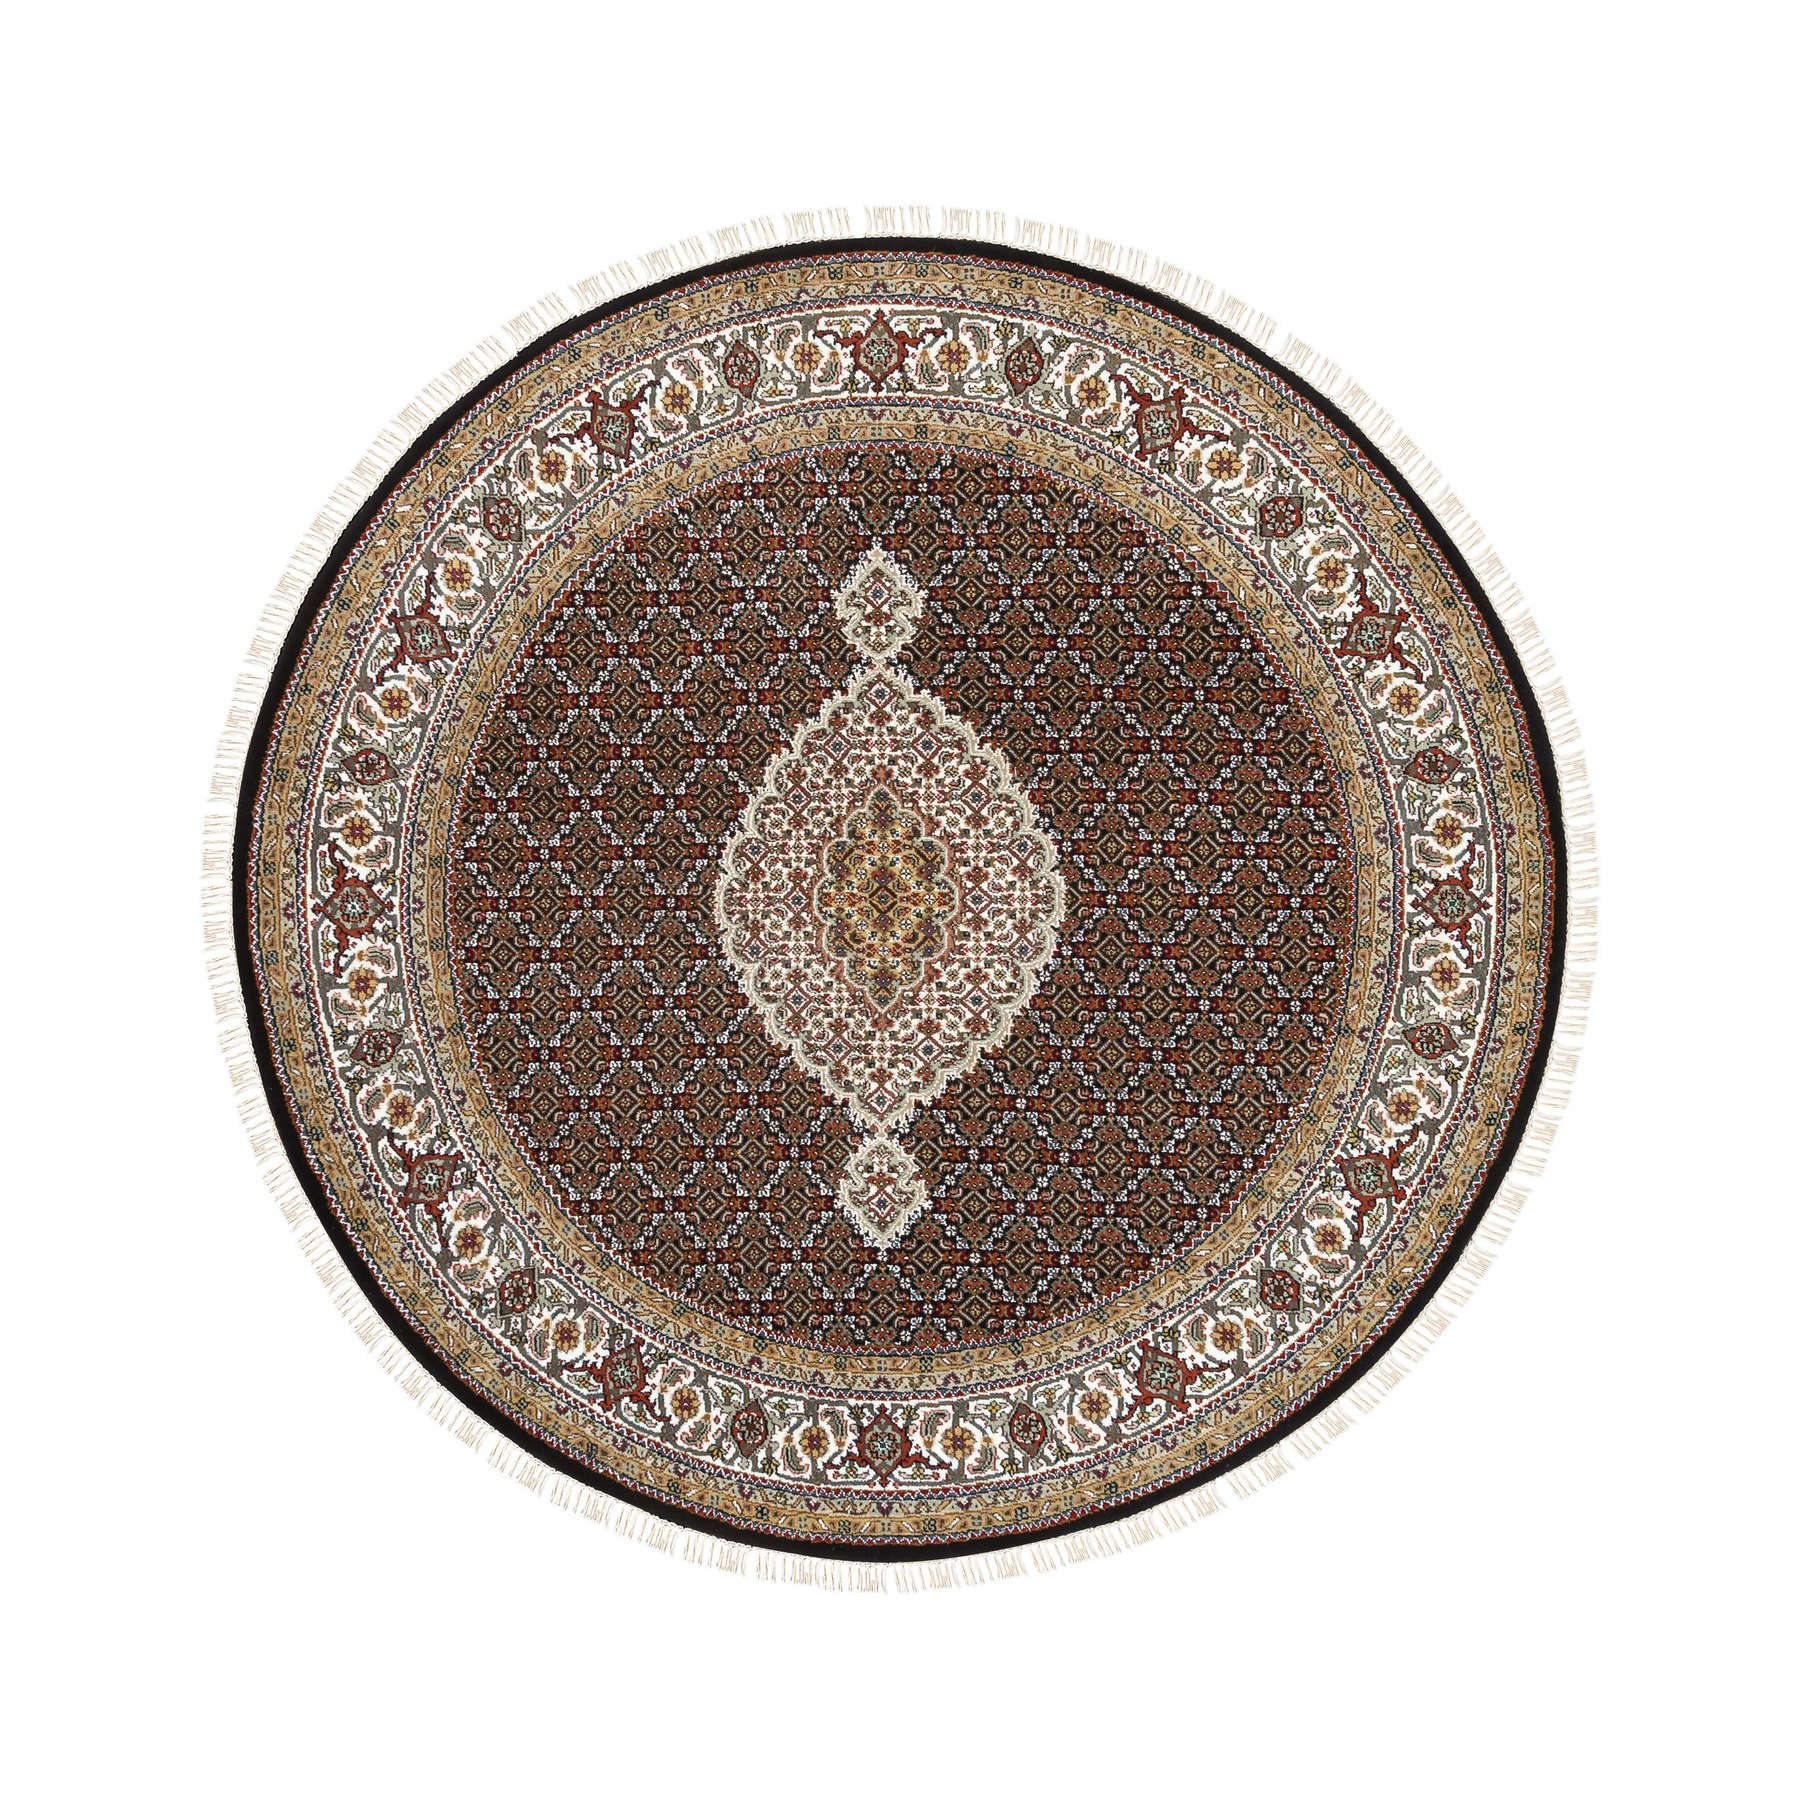 Pirniakan Collection Hand Knotted Black Rug No: 1125230